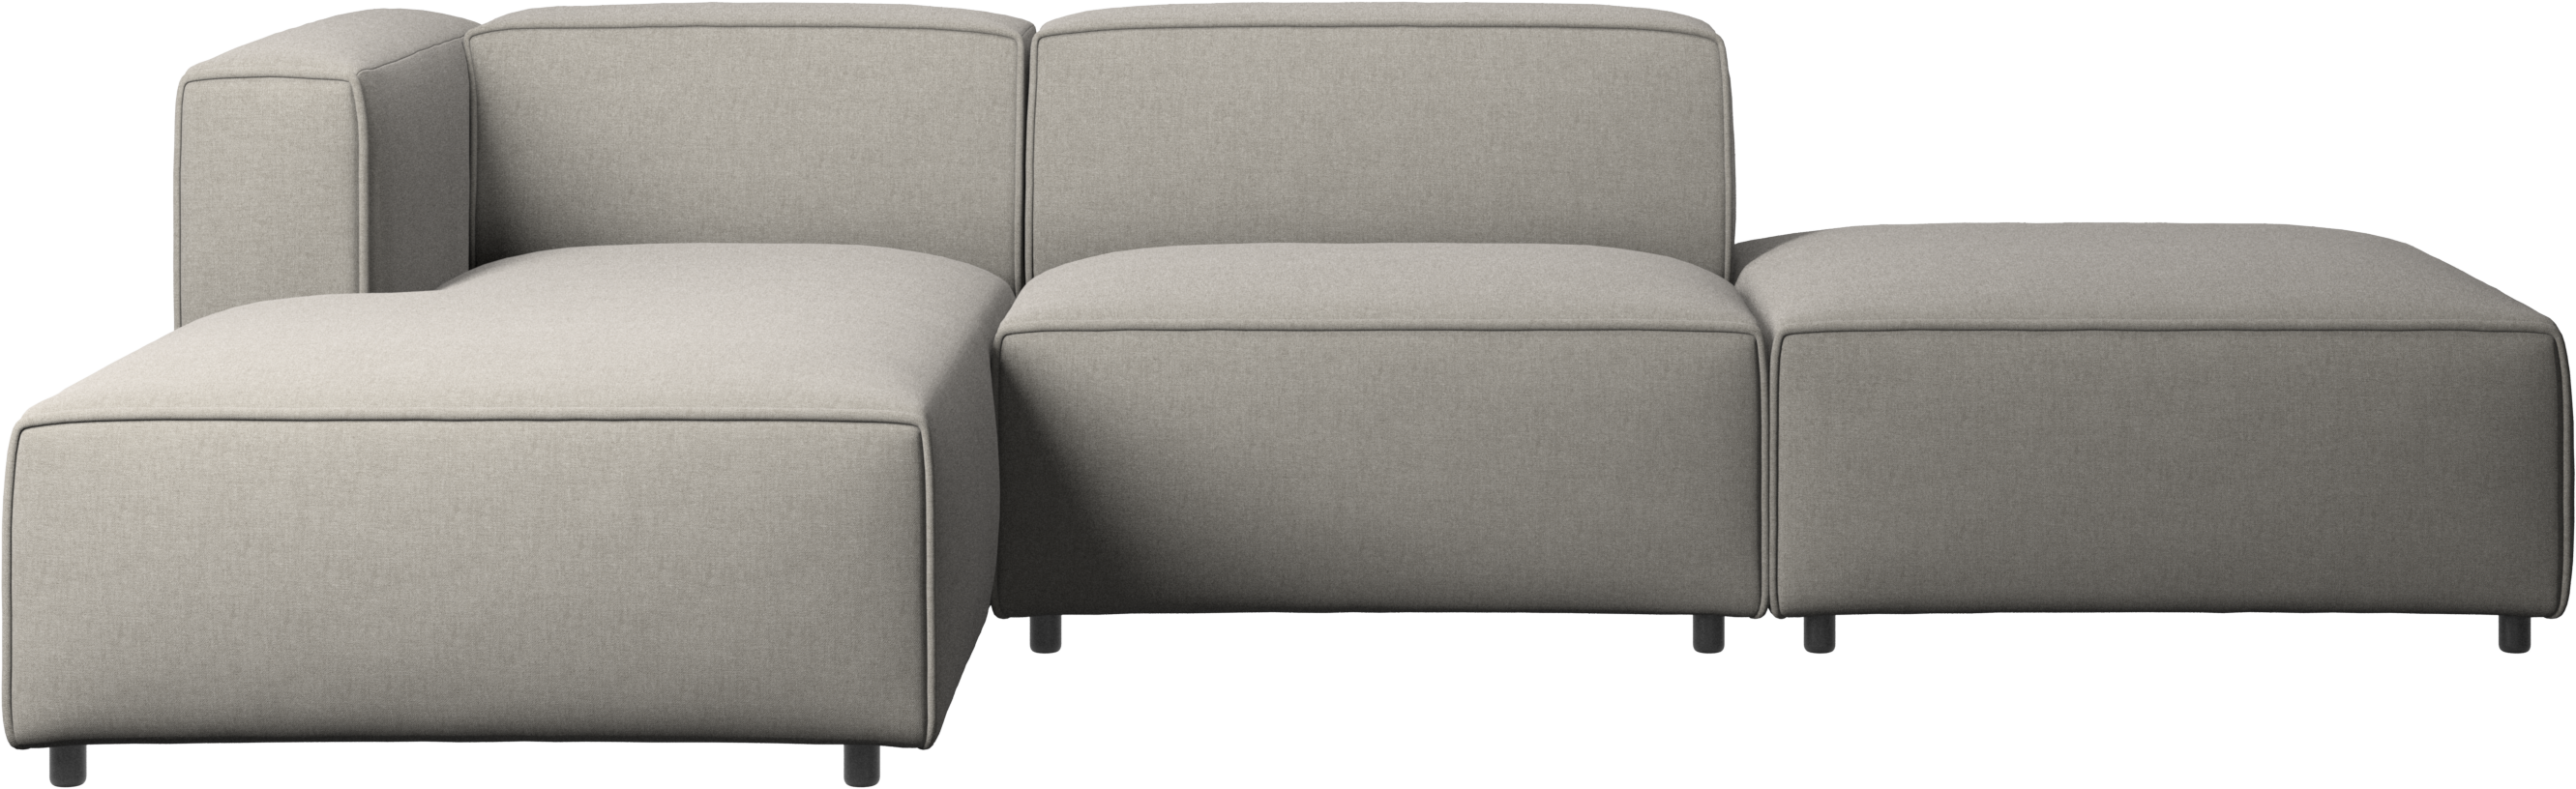 Carmo sofa with lounging and resting unit | BoConcept